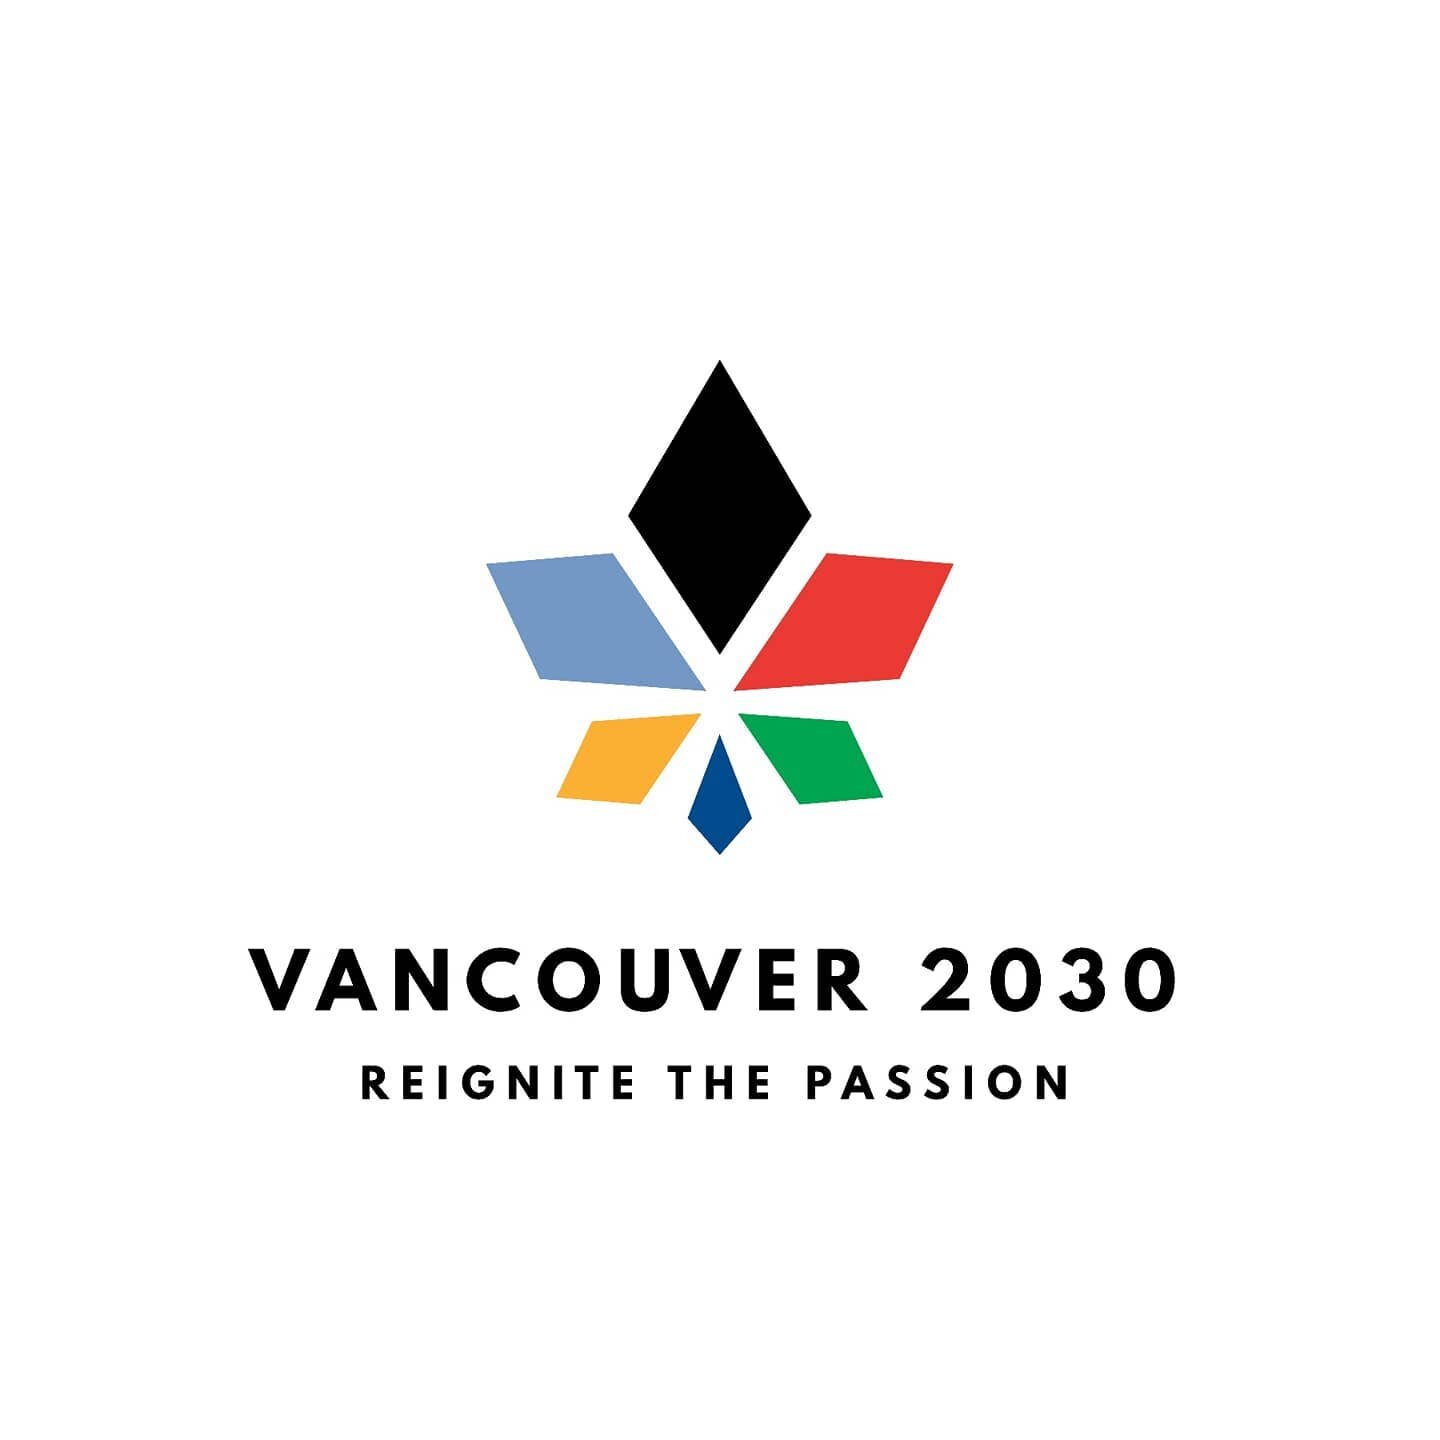 The most exciting project I've had the chance to work on yet.

Very proud to present the new, official logo for Vancouver 2030.

#ReigniteThePassion